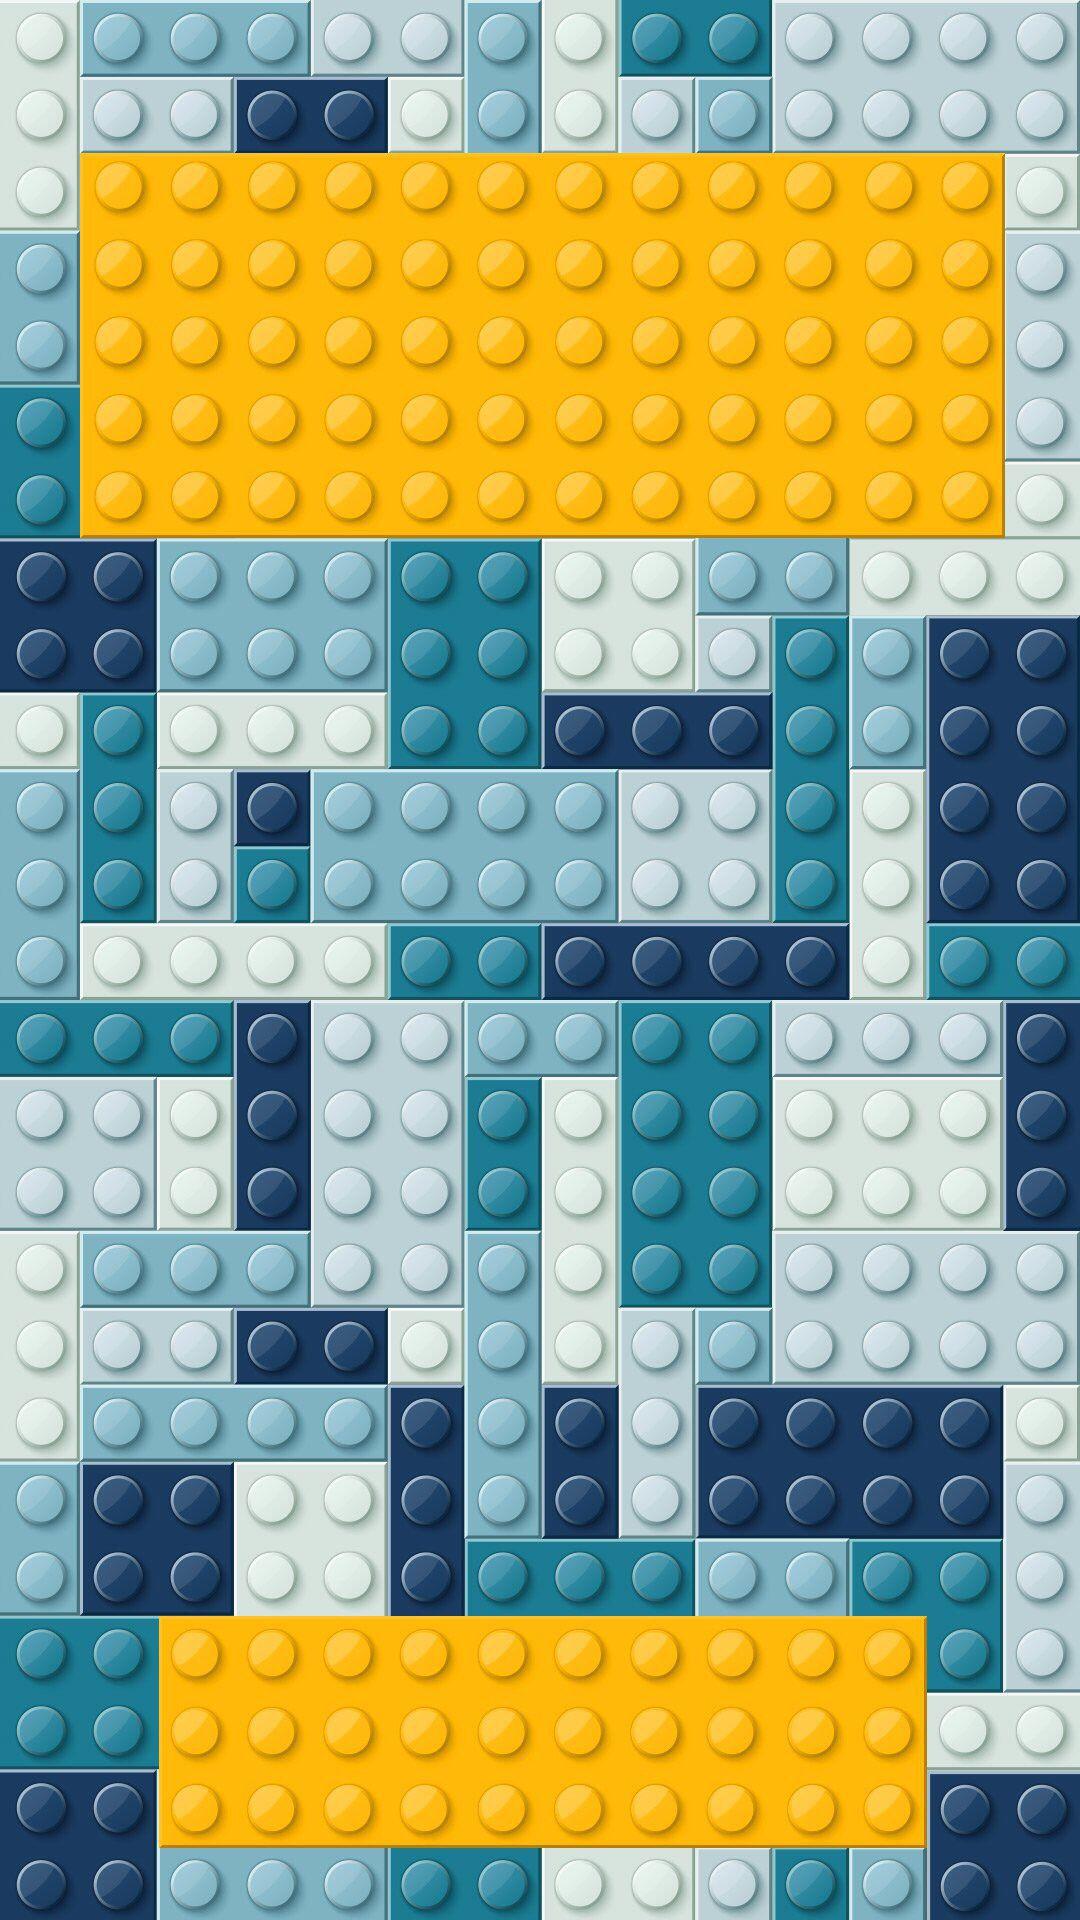 iPhone Apple Lego wallpaper Resolution 1080x1920 | Best Download this awesome wallpaper - Cool Wallpaper HD - CoolWallpaper-HD.com